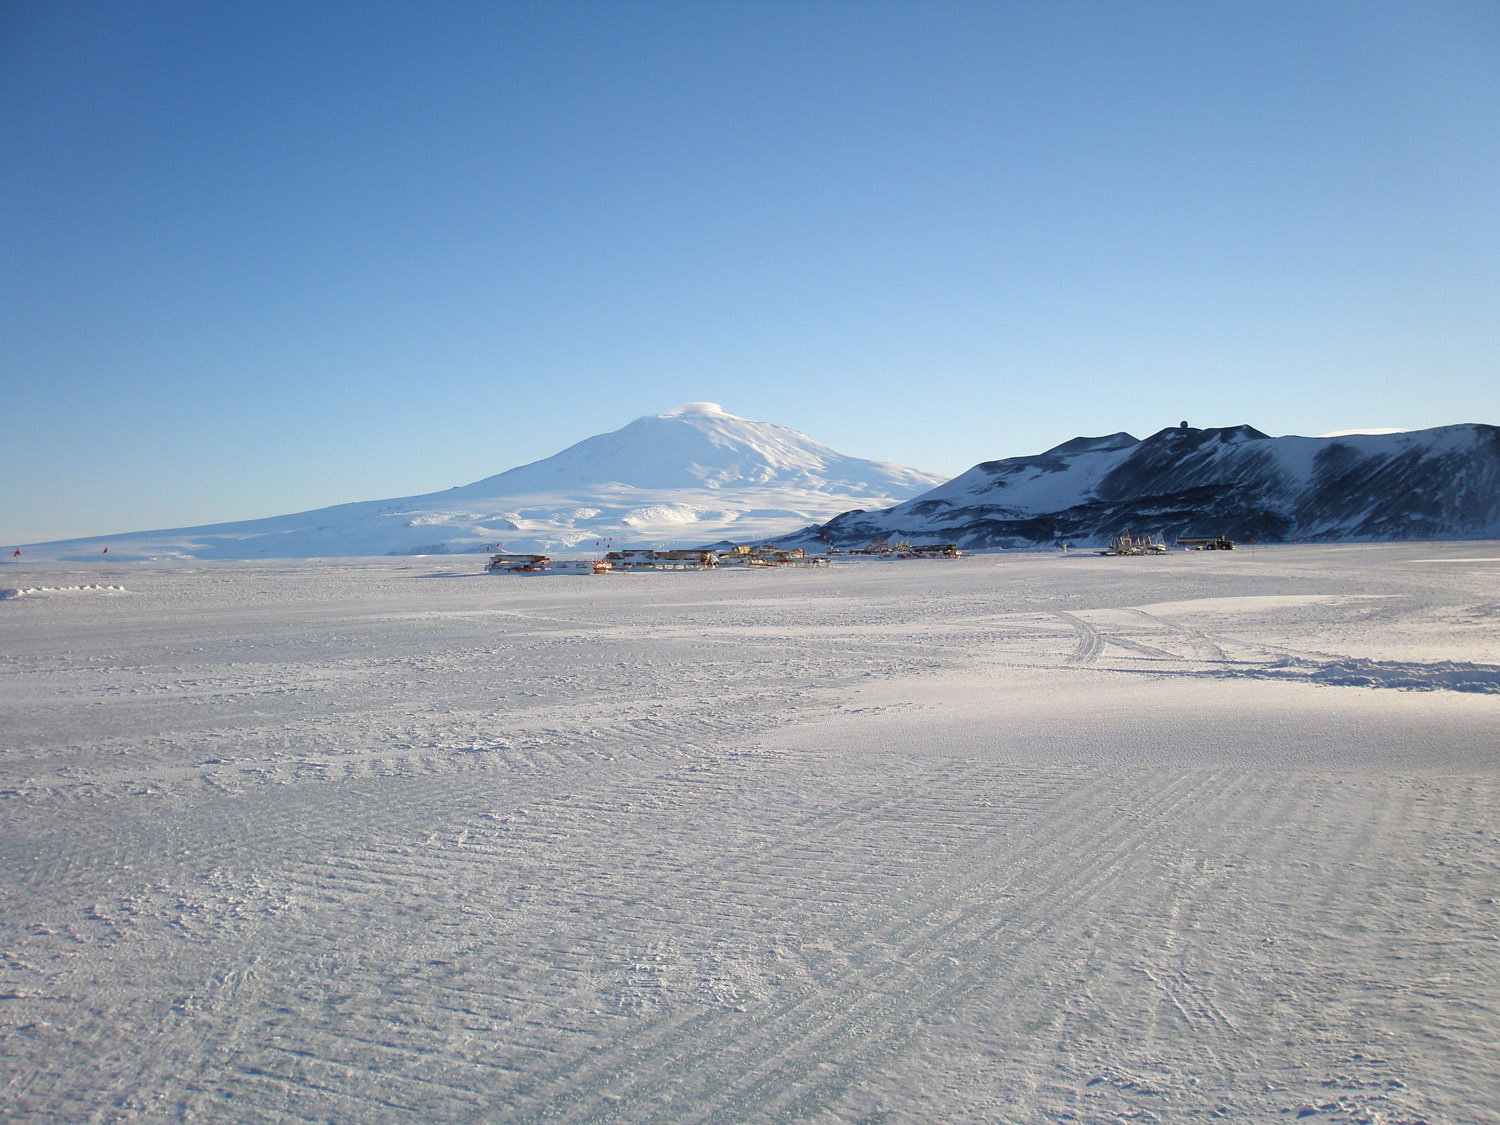 Mount Erebus - from the runway